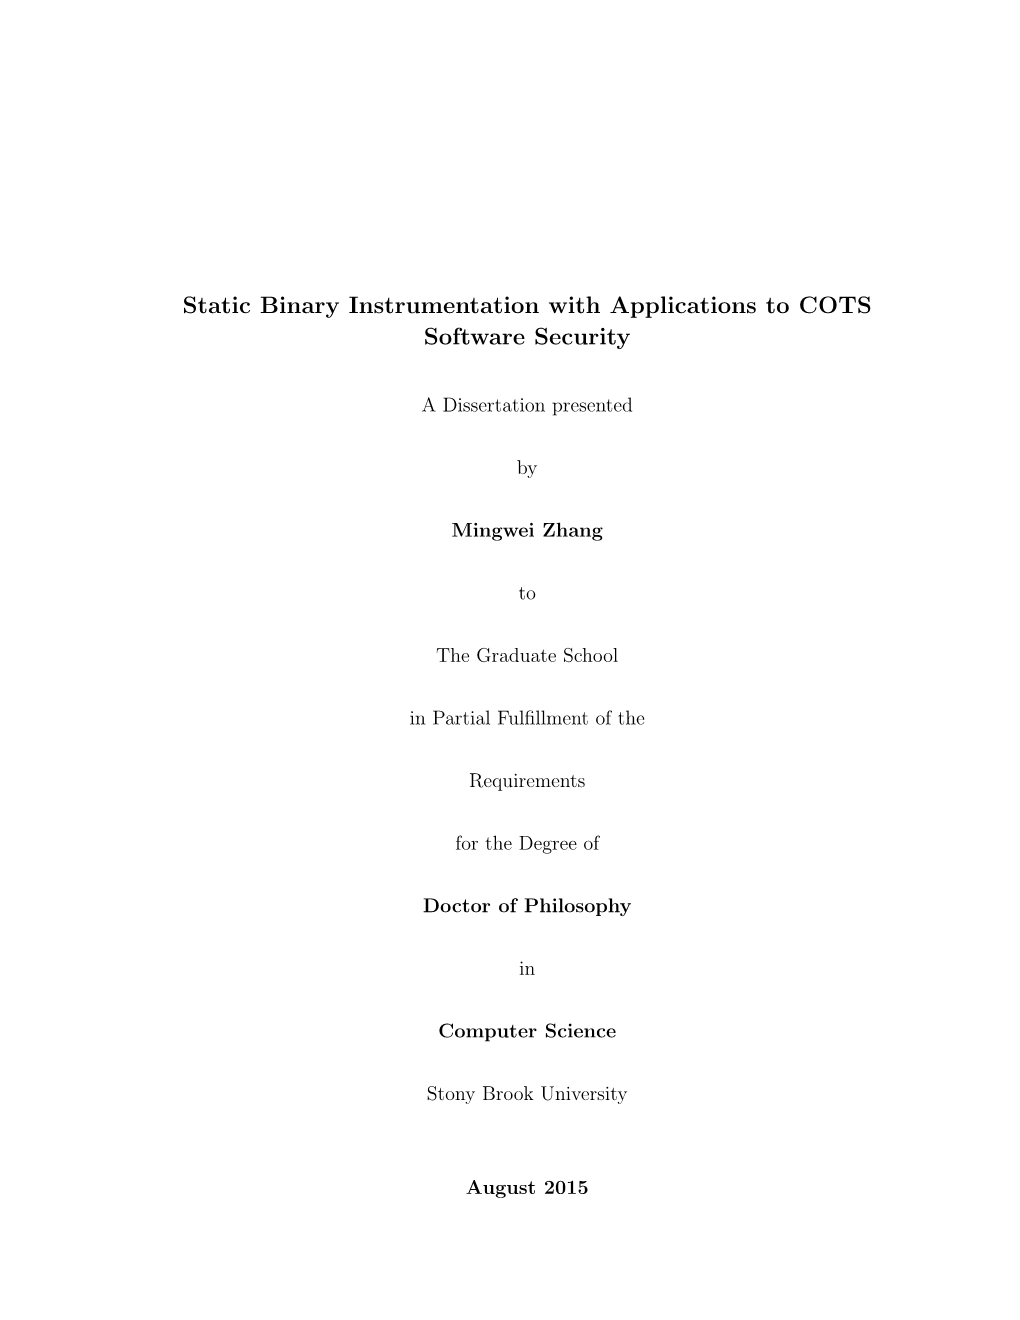 Static Binary Instrumentation with Applications to COTS Software Security